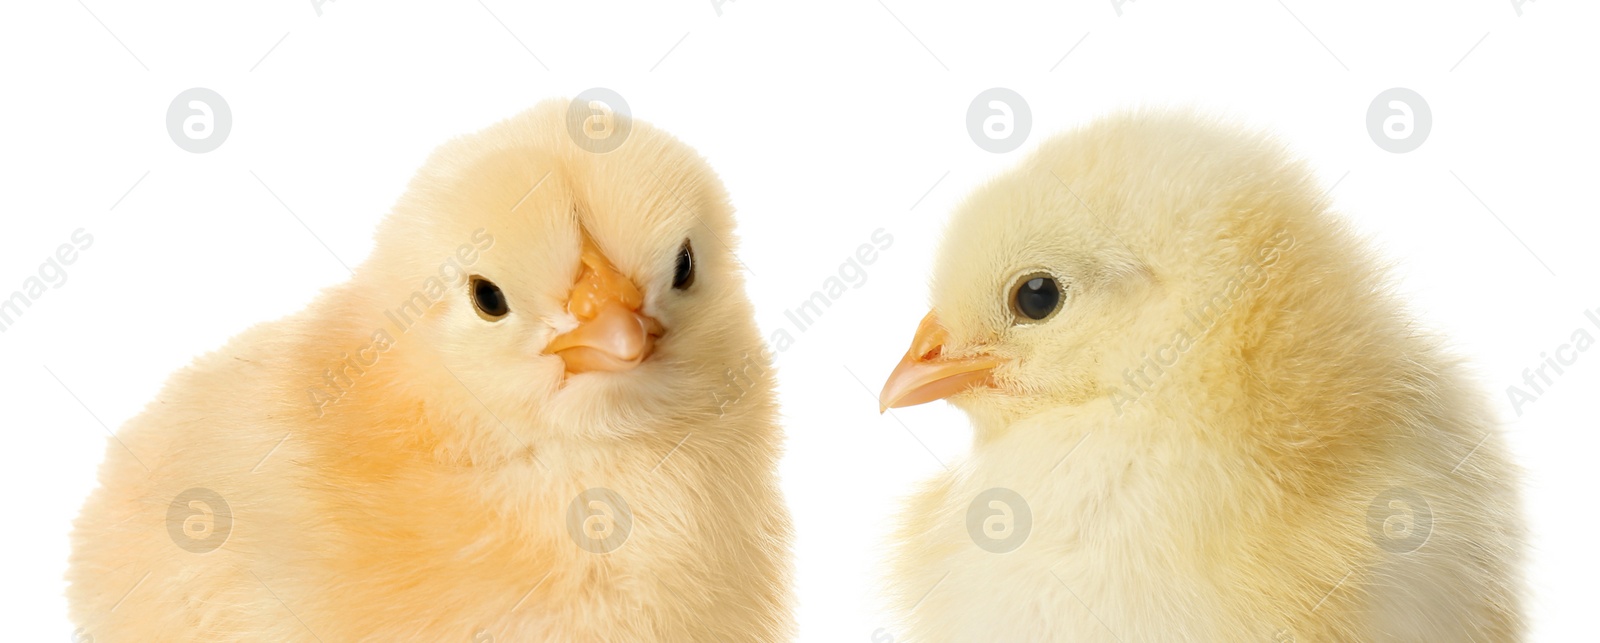 Image of Two cute fluffy chickens on white background. Farm animals